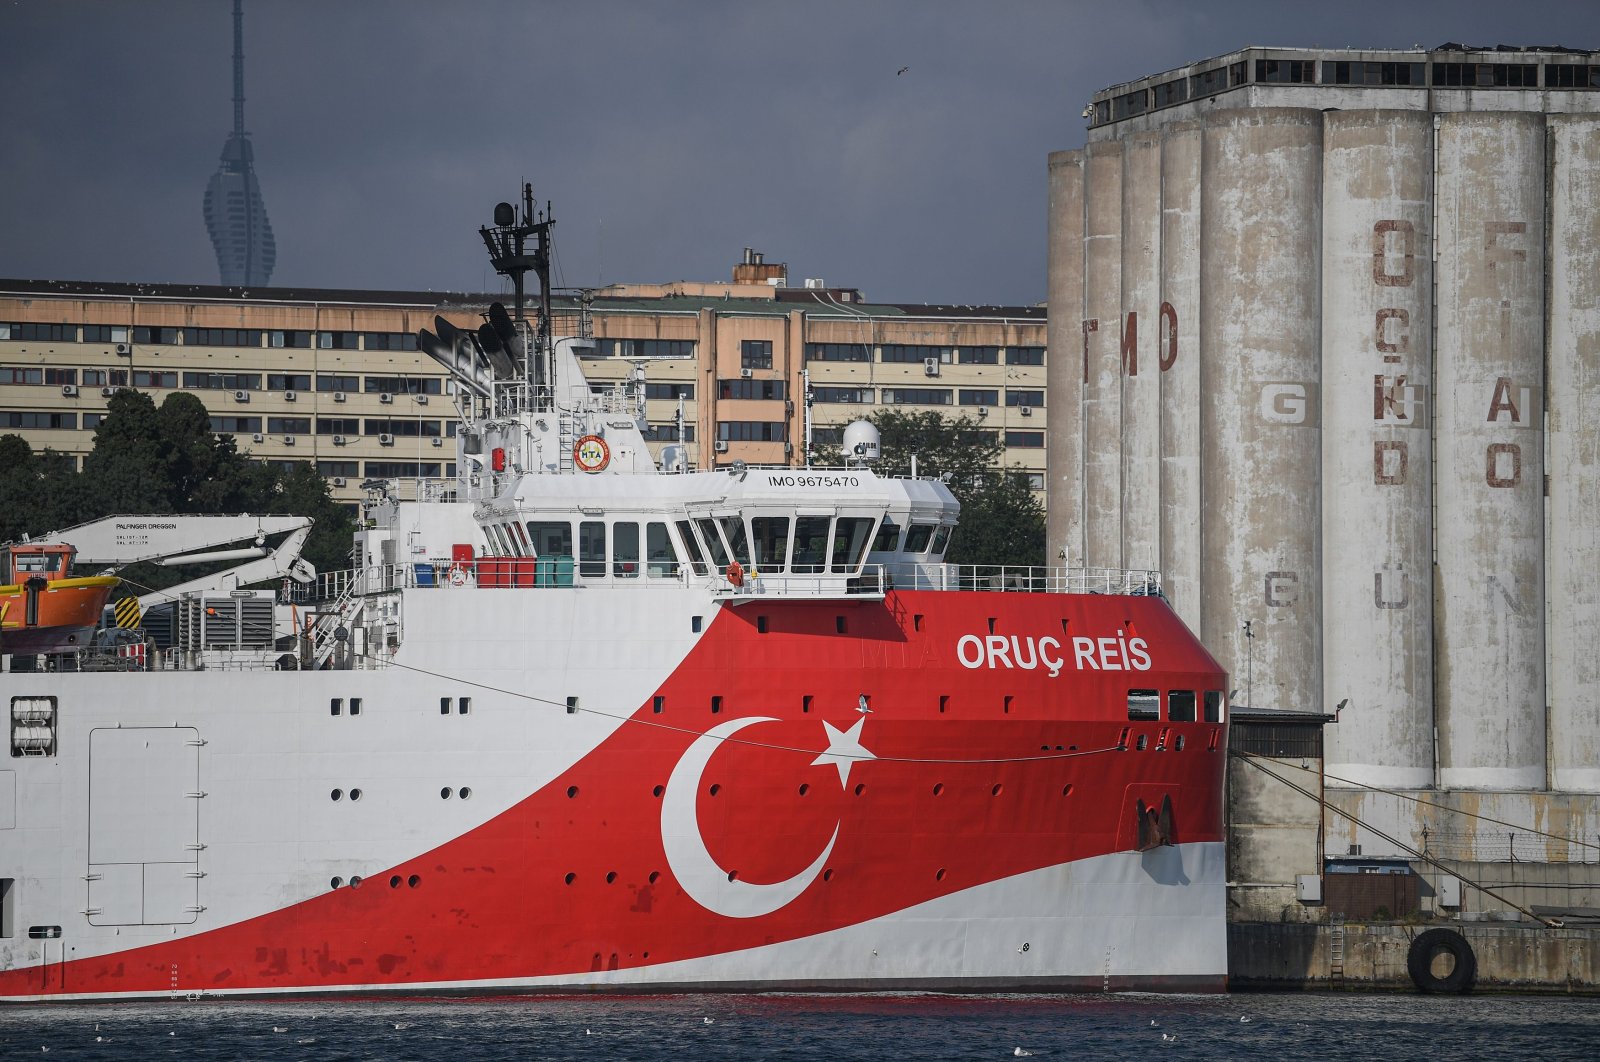 The Turkish General Directorate of Mineral Research and Exploration's (MTA) Oruç Reis seismic research vessel docks at Haydarpaşa Port in Istanbul, Turkey, Aug. 23, 2019.